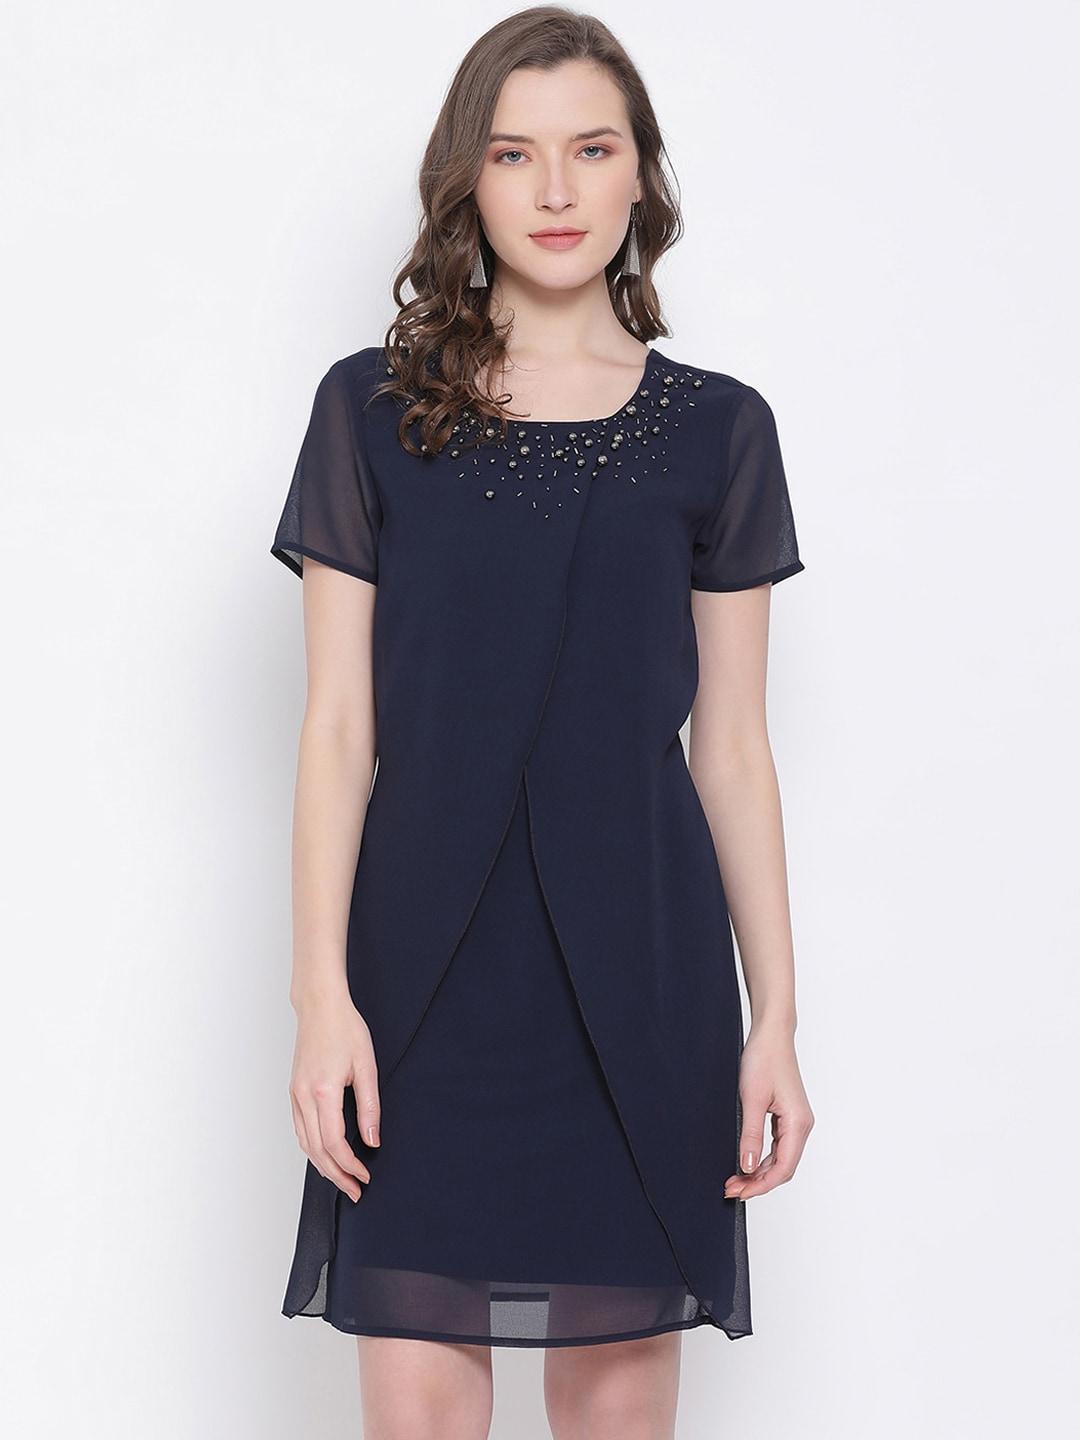 ly2-women-navy-blue-solid-wrap-dress